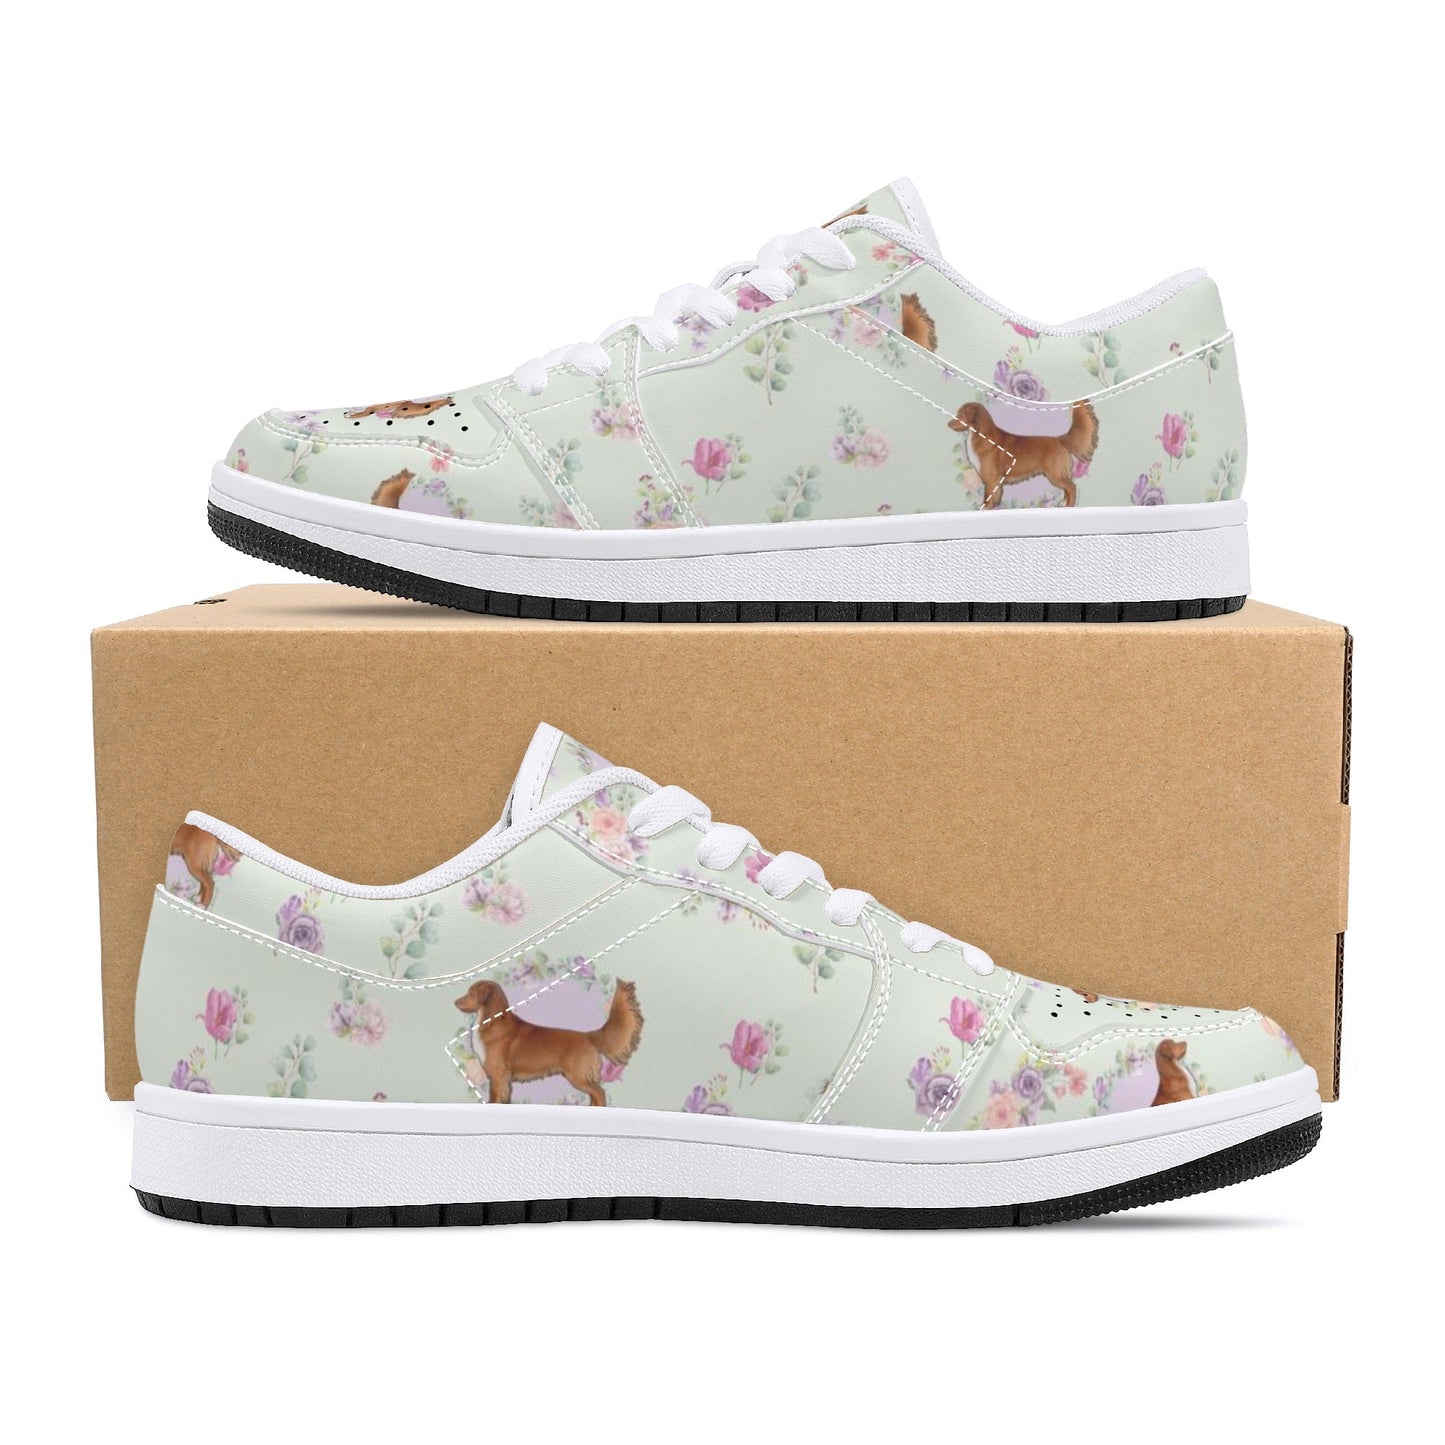 Womens Low Top PU Leather Sneakers